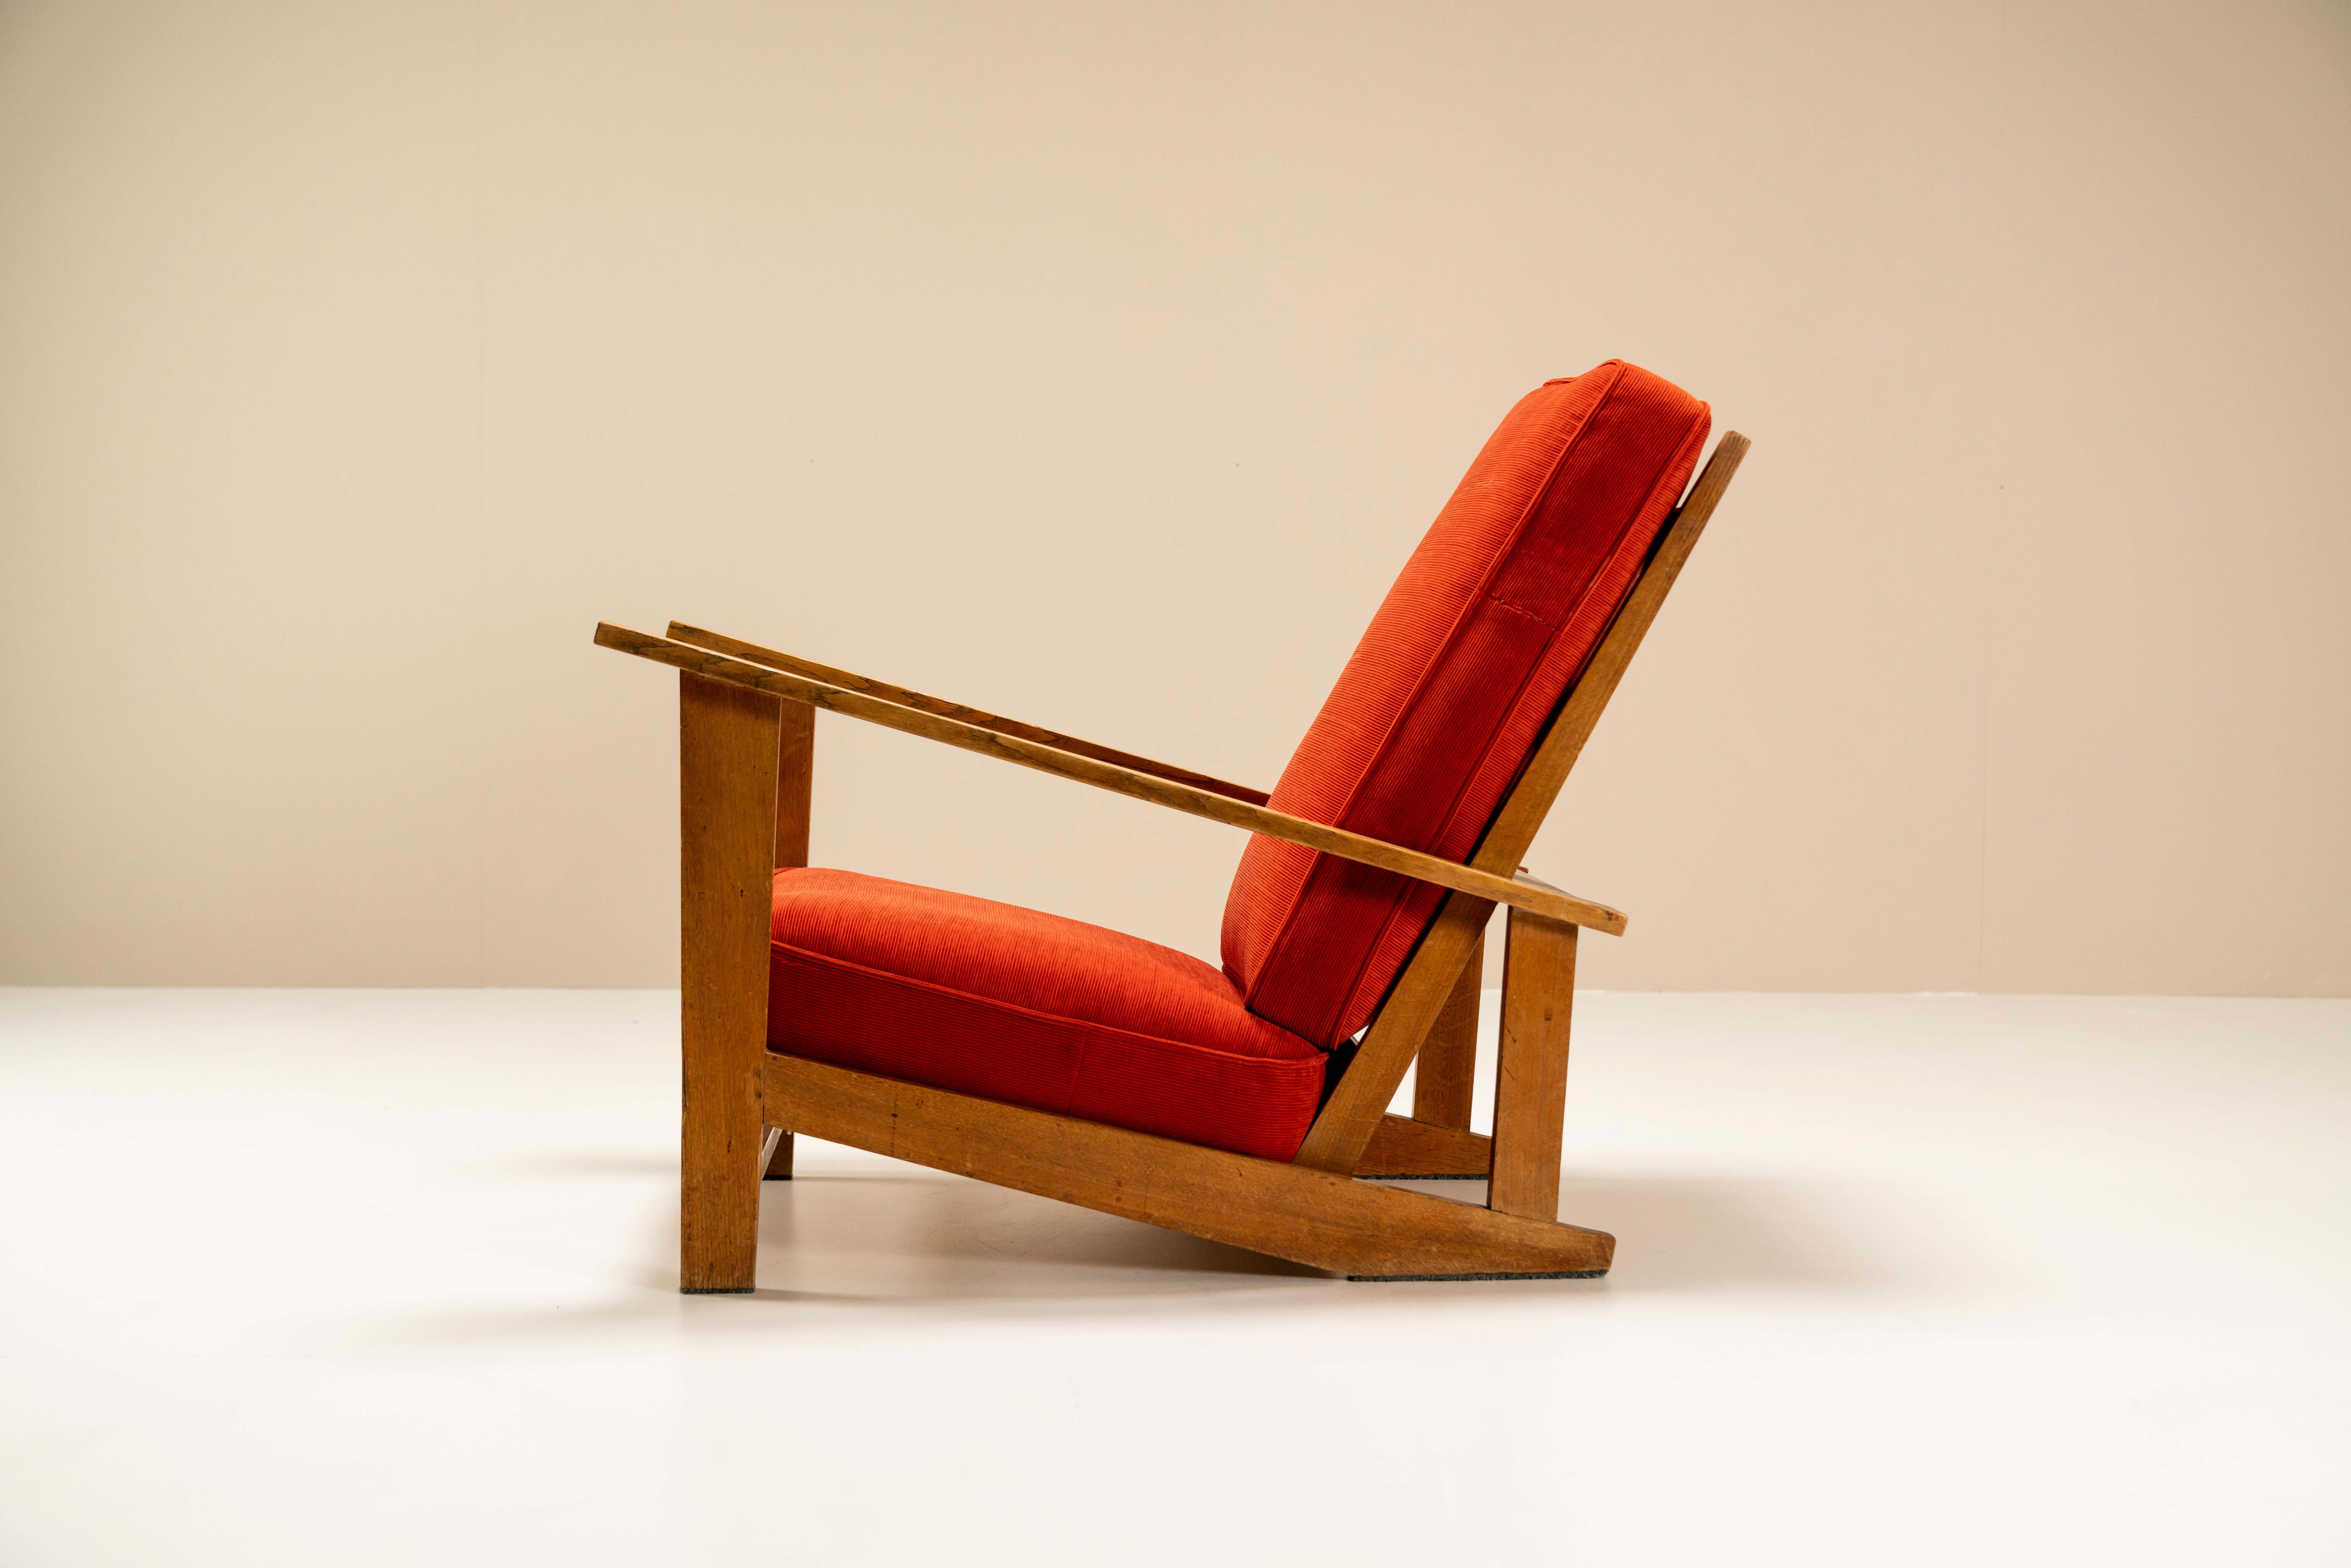 Mid-20th Century Dutch Lounge Chairs in Beech and Vermillion Upholstery Attr. to Groenekan 1950s For Sale